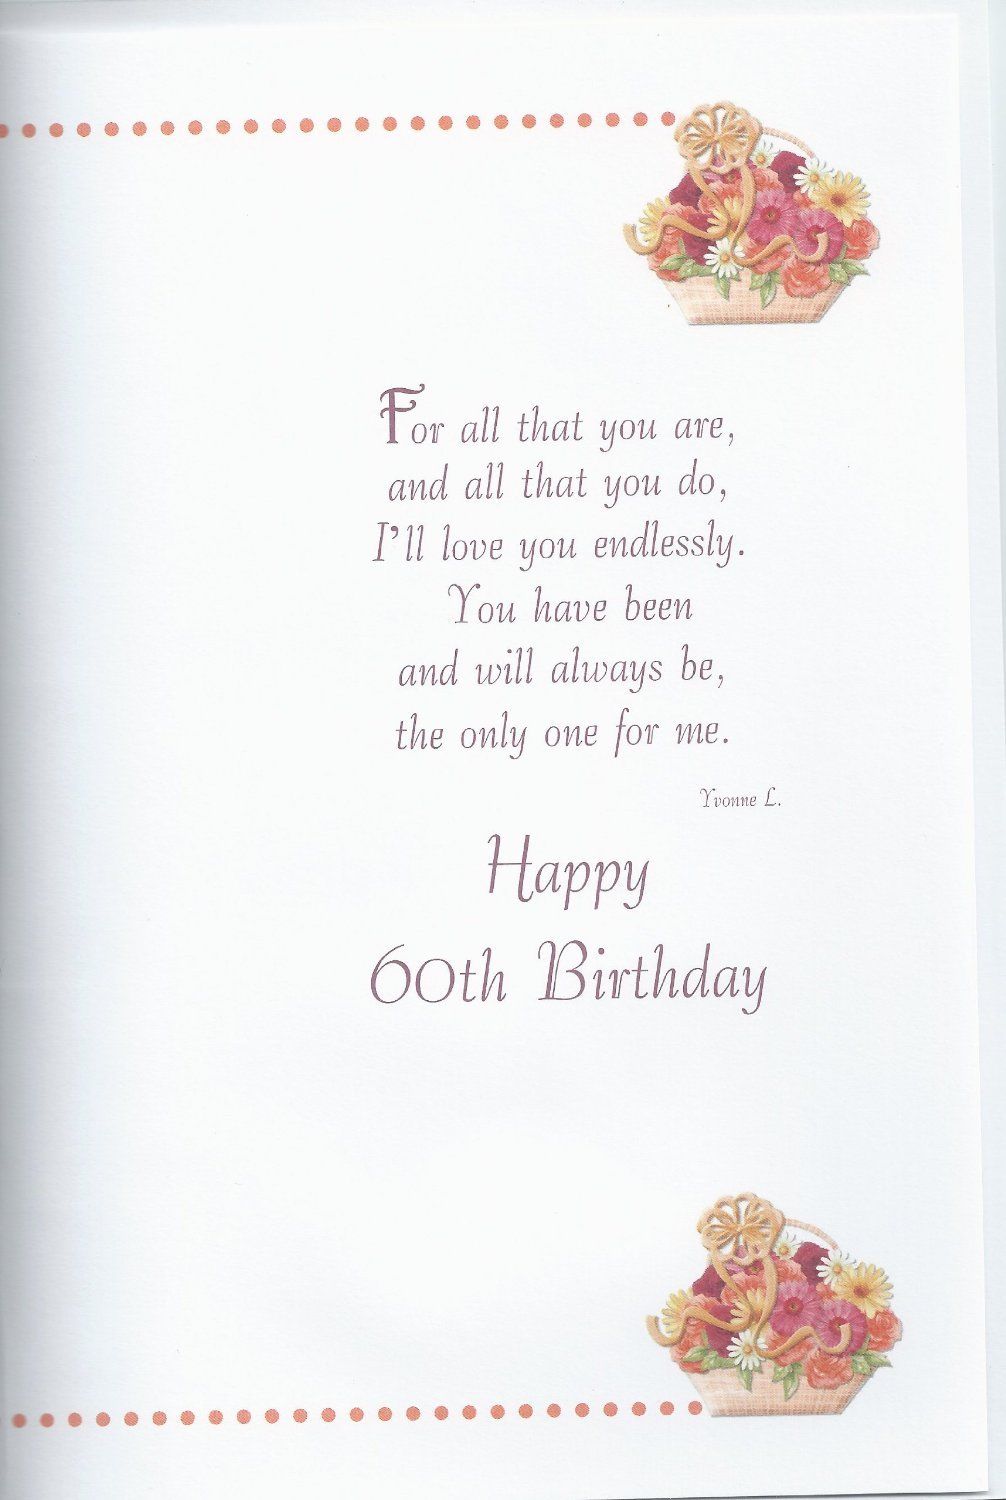 With Love To My Wife On Your 60th Birthday card